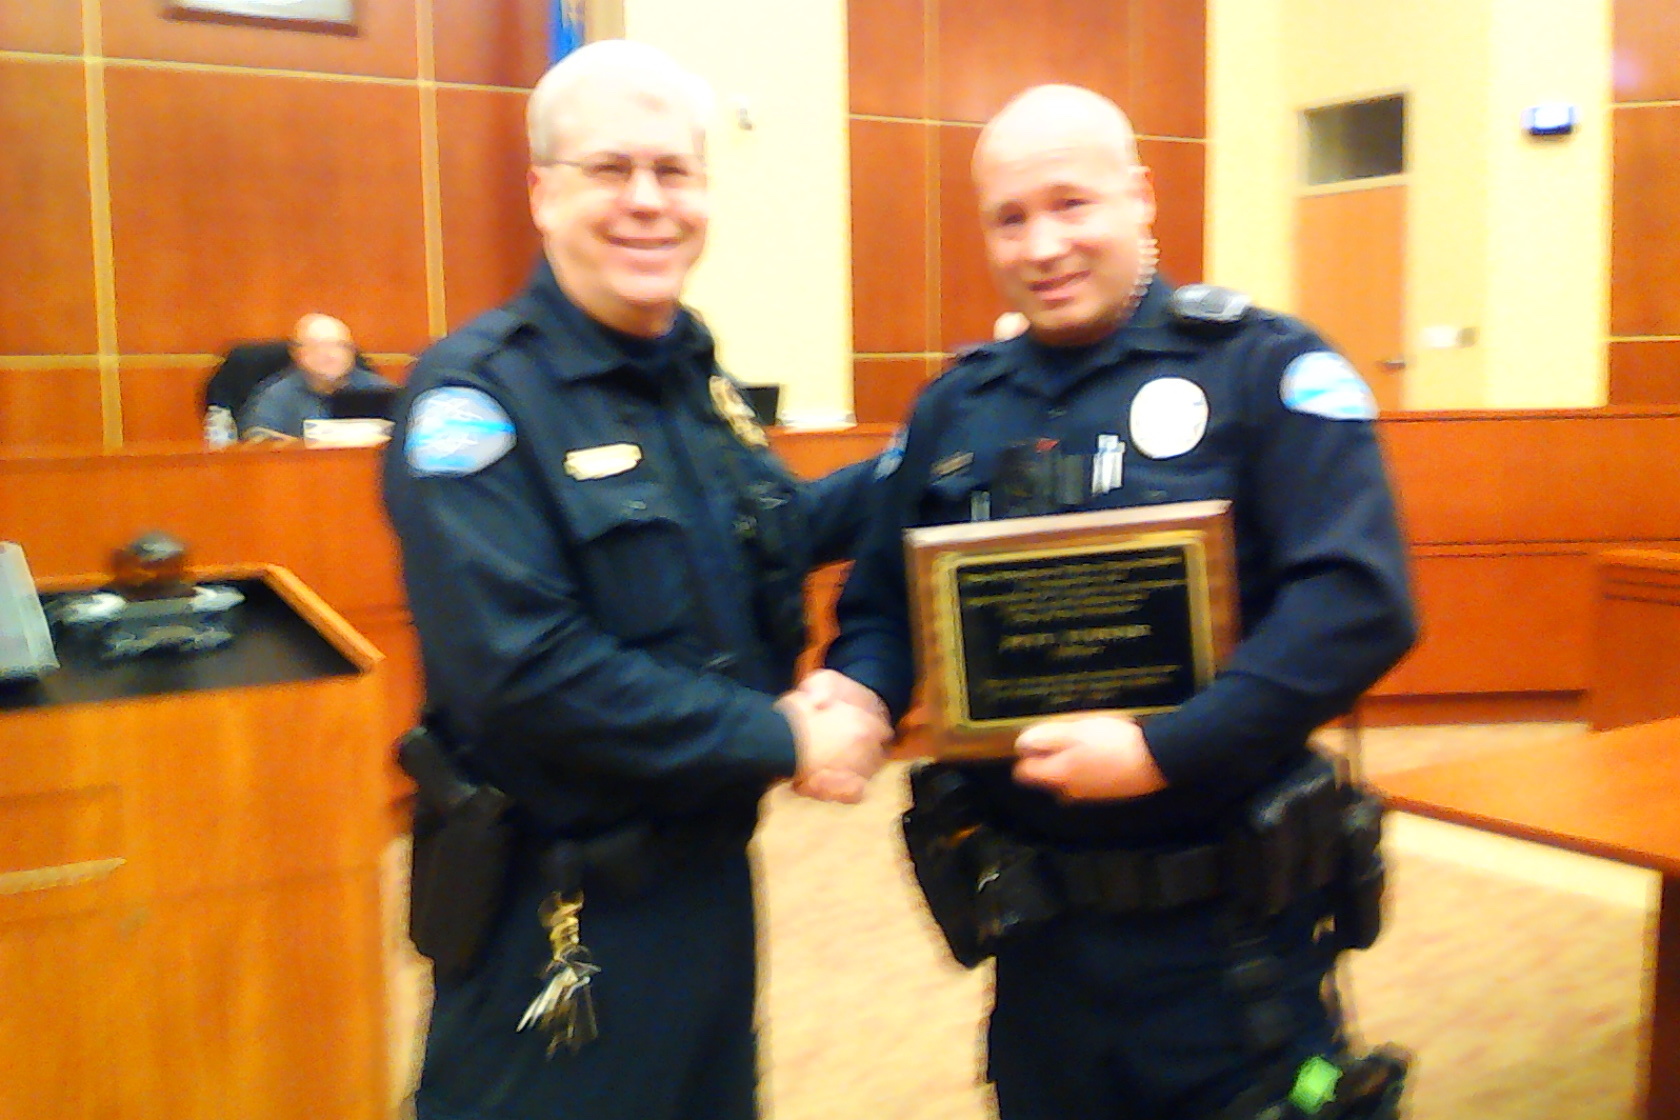 Police Officer Pete Turner receiving a recognition plaque for 10 Years of Service from Police Chief Burdel Welsh. 